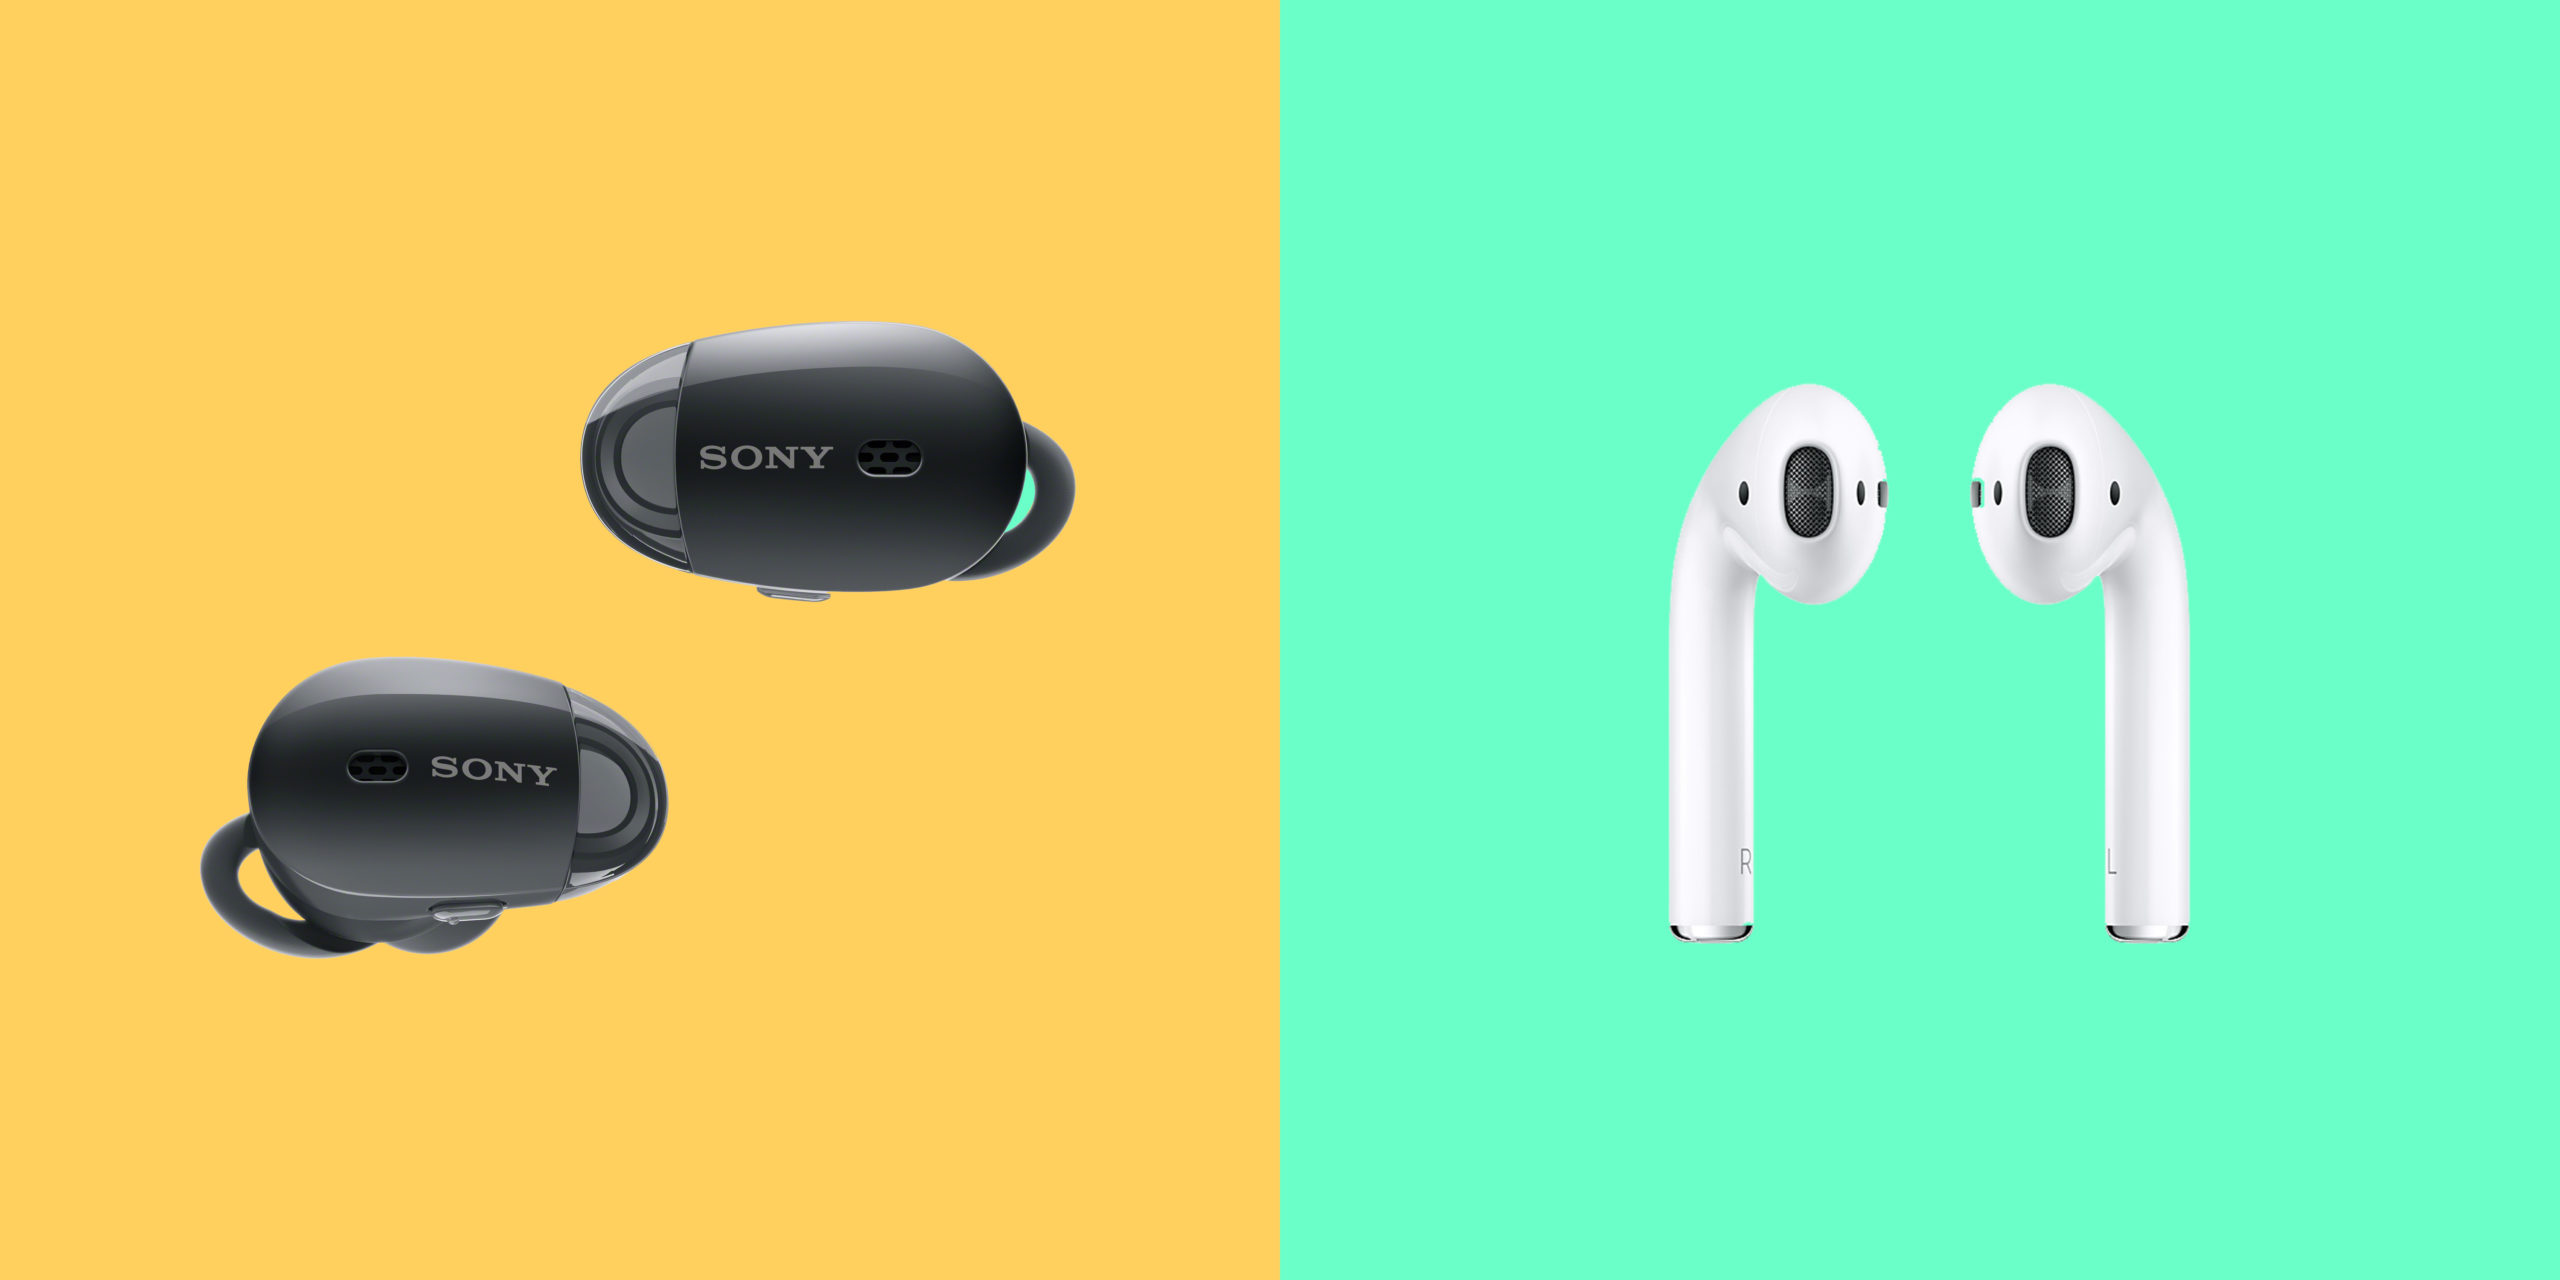 Sony Basically Ripped Off Apple’s Newest Products